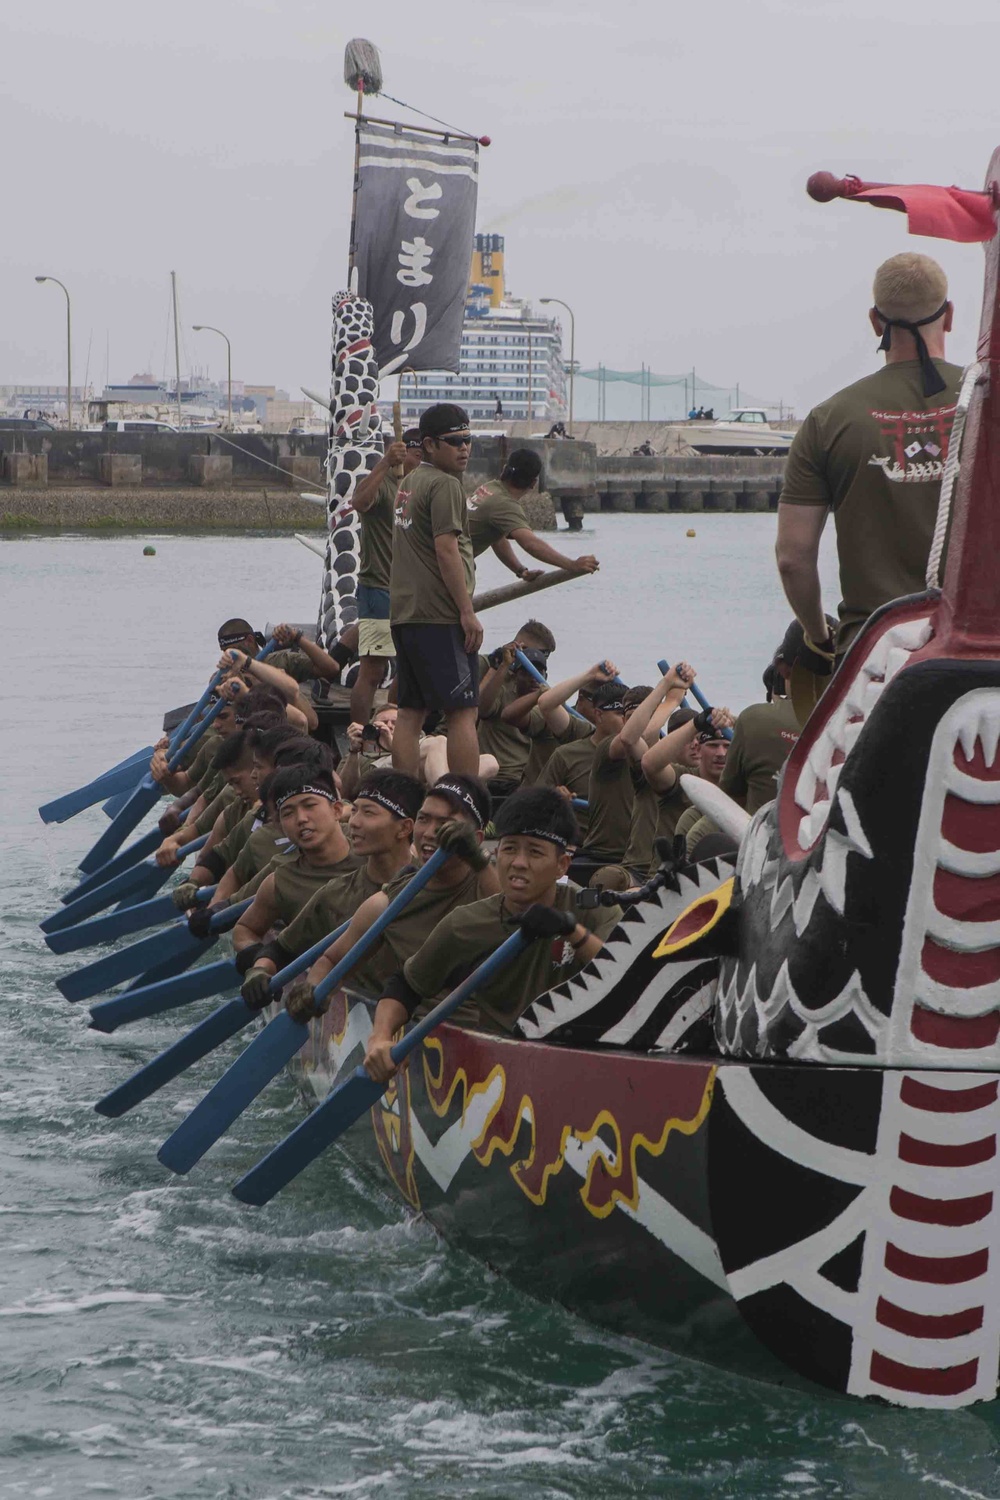 Heart of the Dragon - JGSDF and U.S. Marines team up, conquer Naha Dragon Boat Races